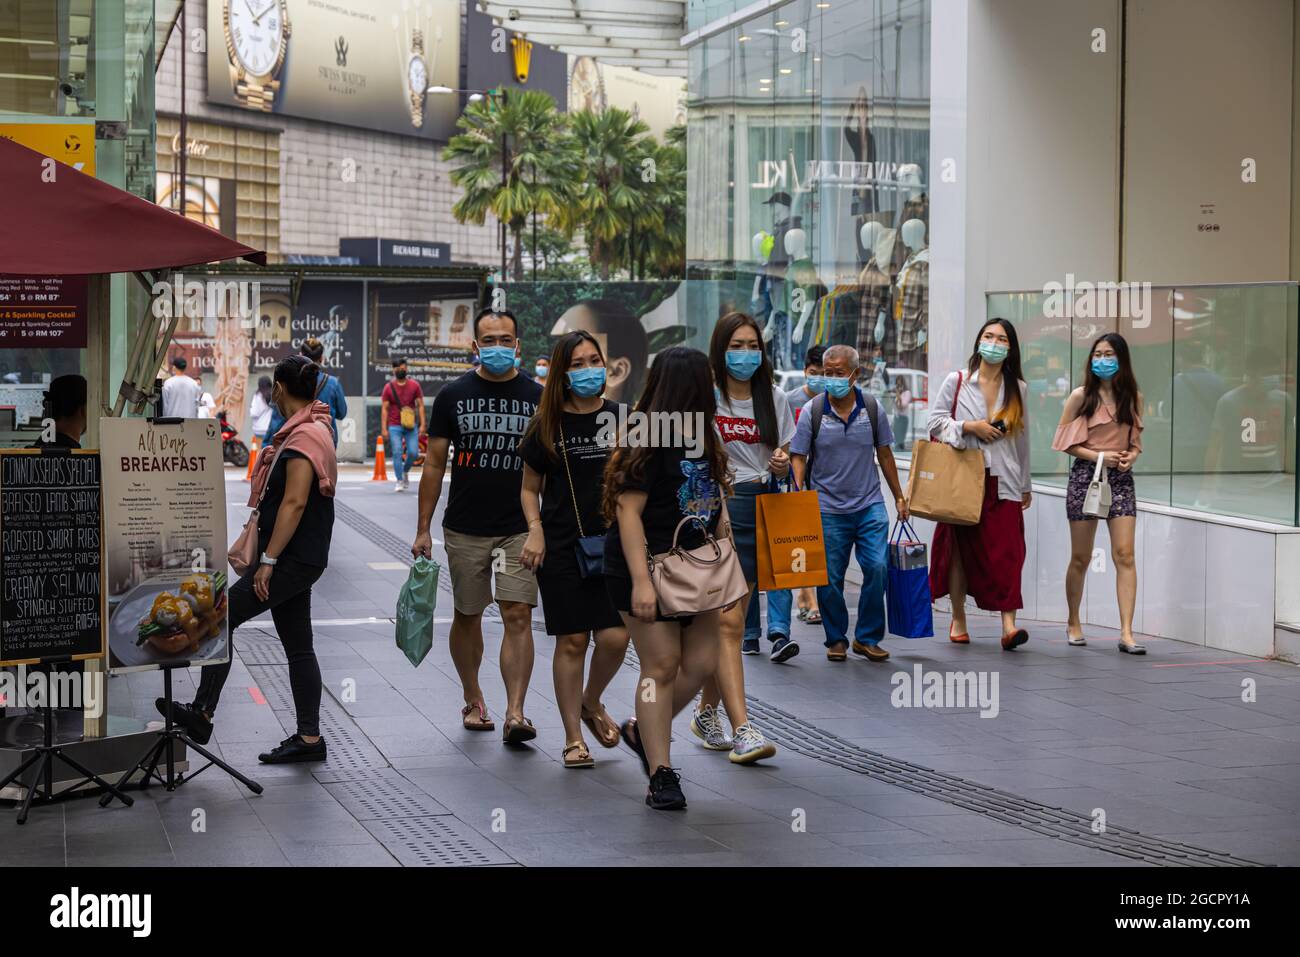 Kuala Lumpur, Malaysia - October 04, 2020: Street scene in Corona times. People with Face mask passing by. Masks are compulsory in crowded areas in Ma Stock Photo